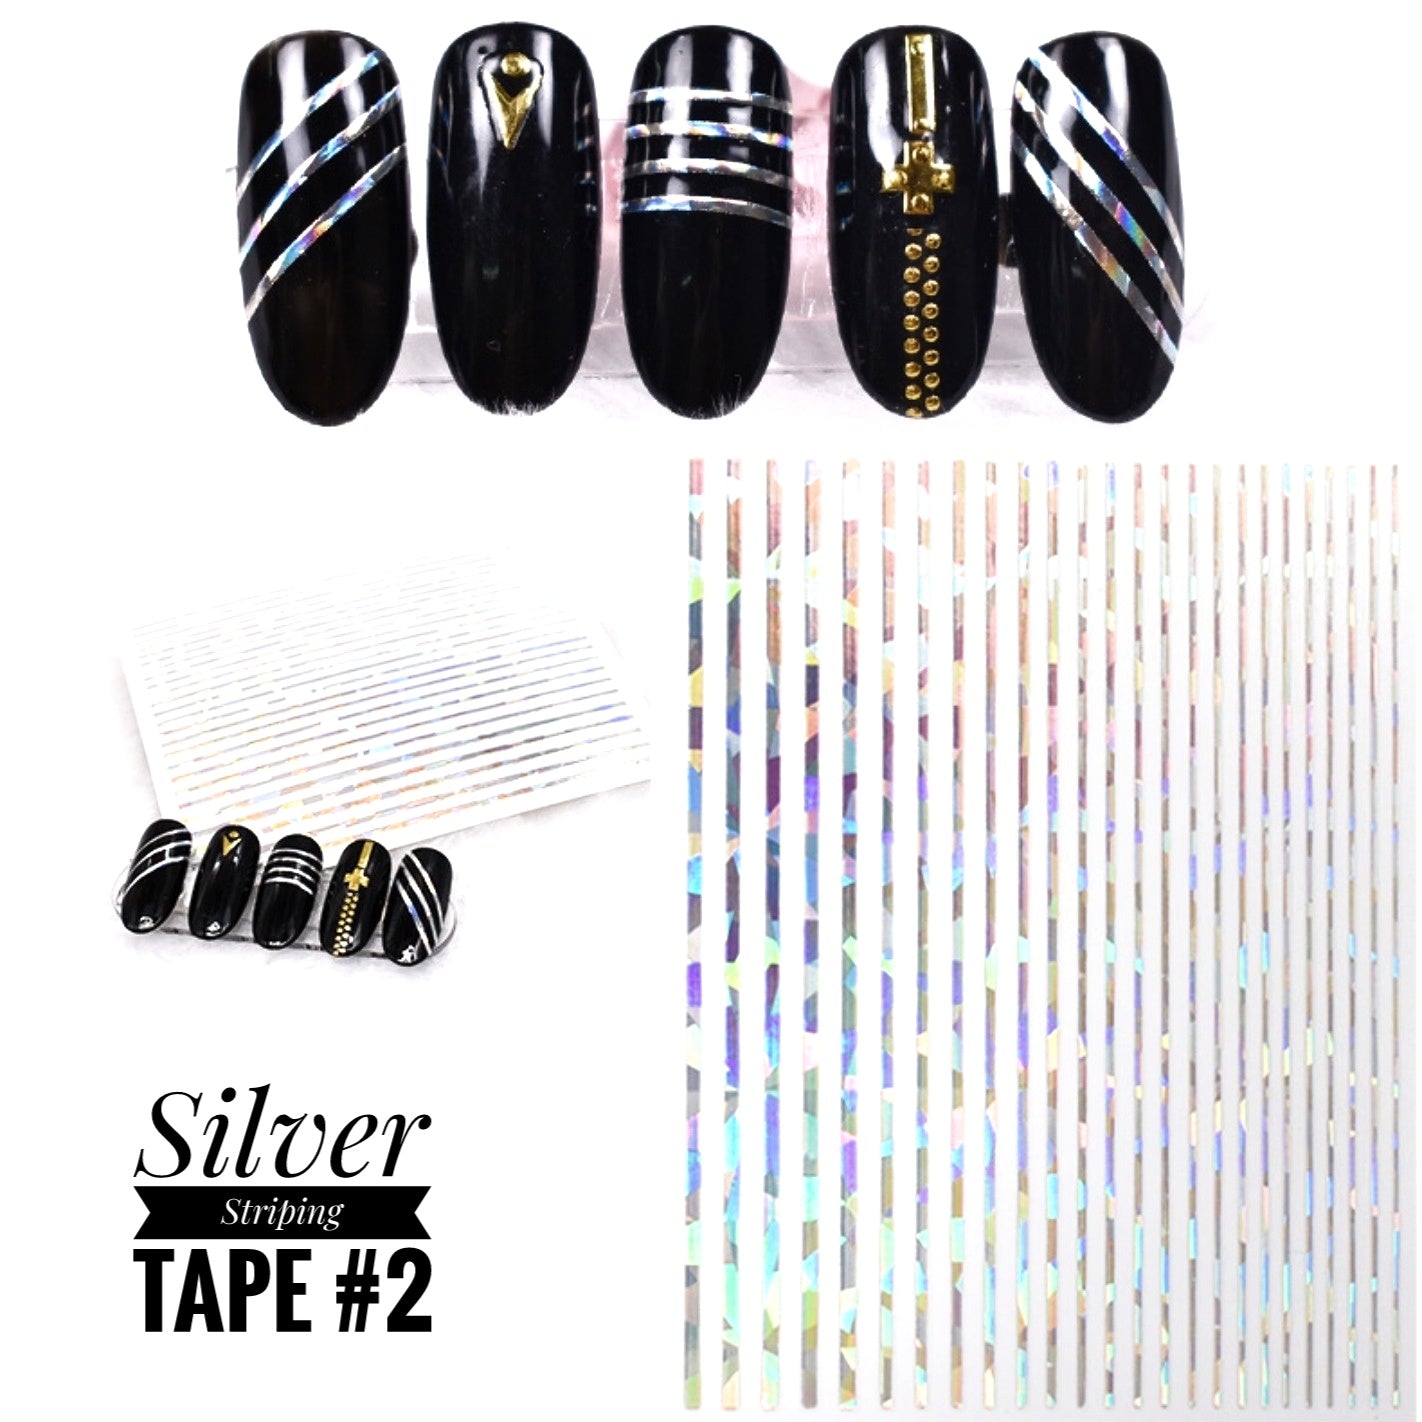 194-Sticker Decals -Striping Tape Silver